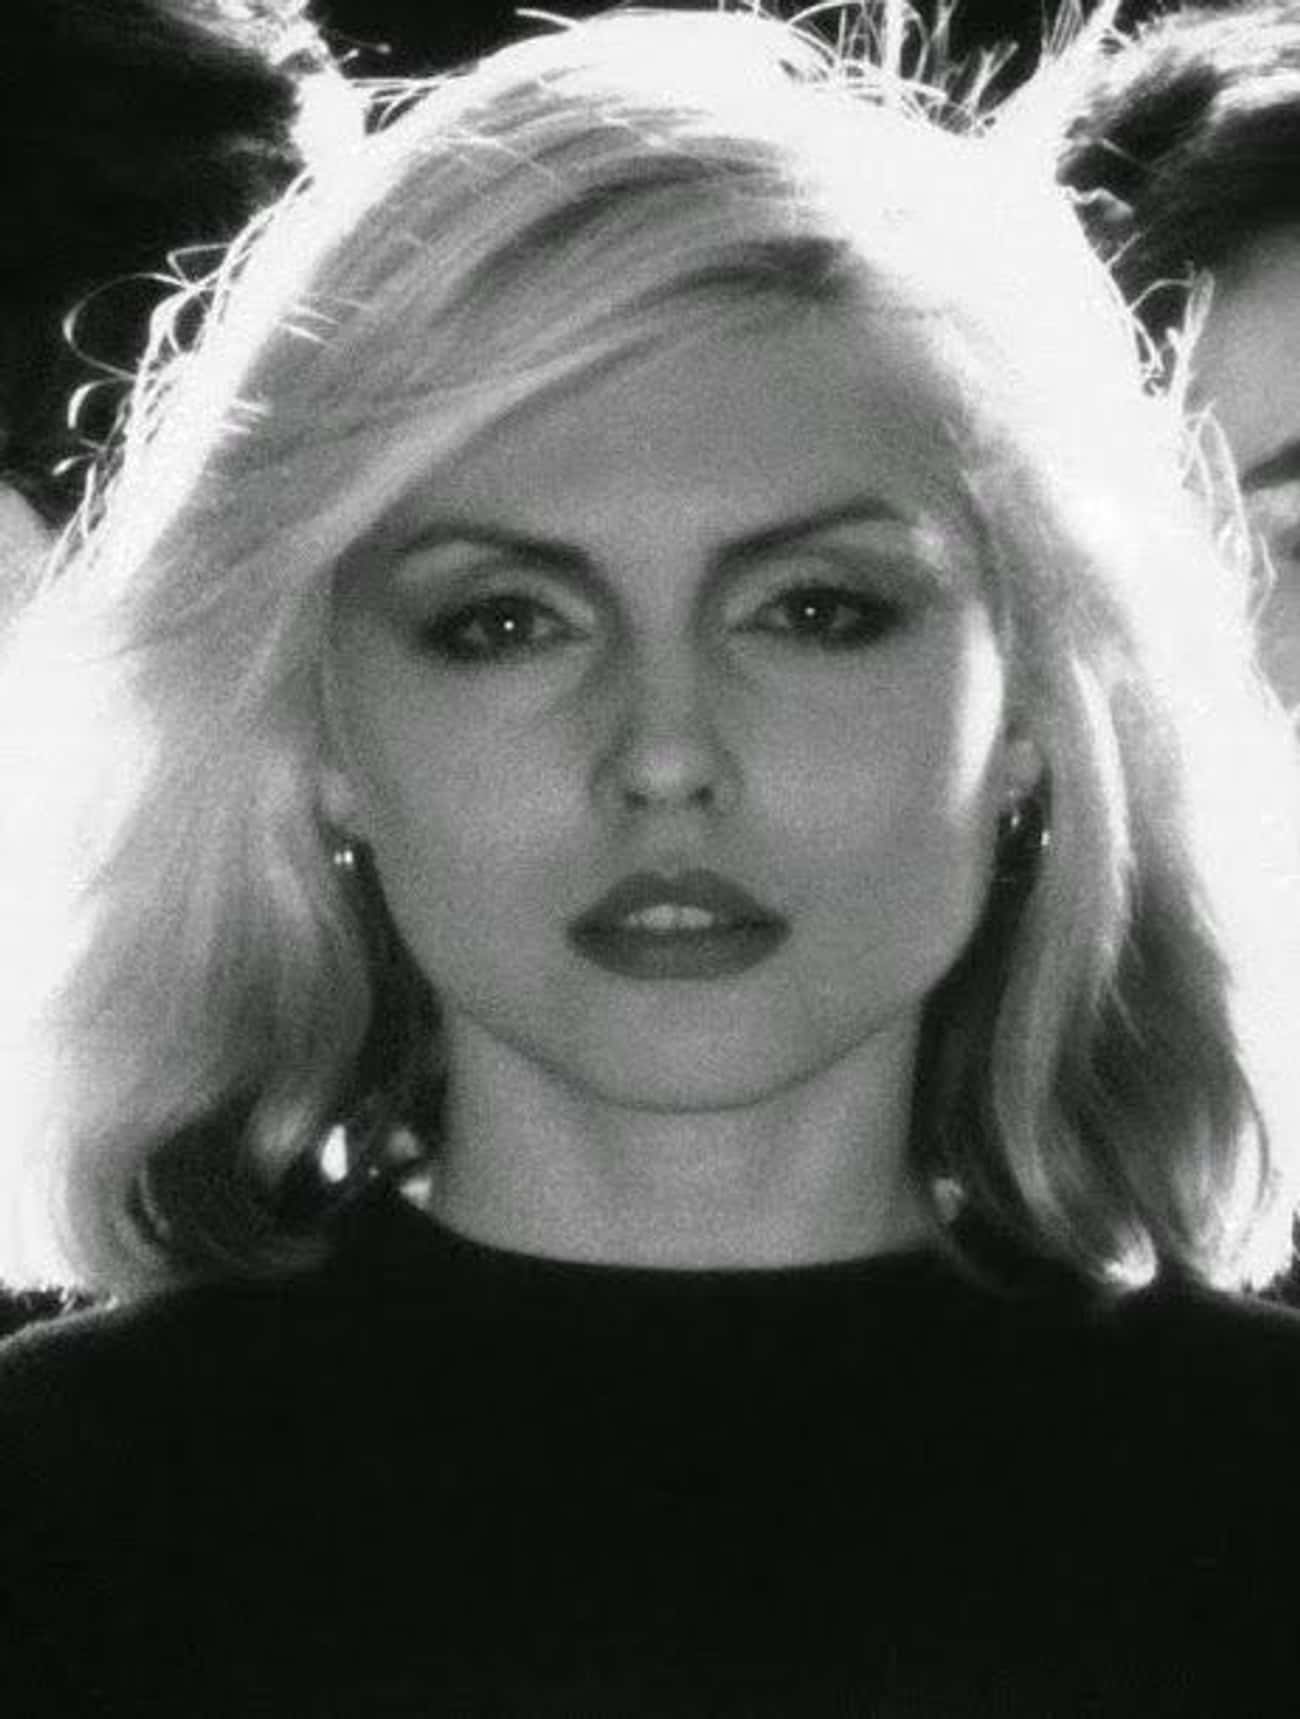 Debbie Harry Had A Run-In With Ted Bundy (Probably False)